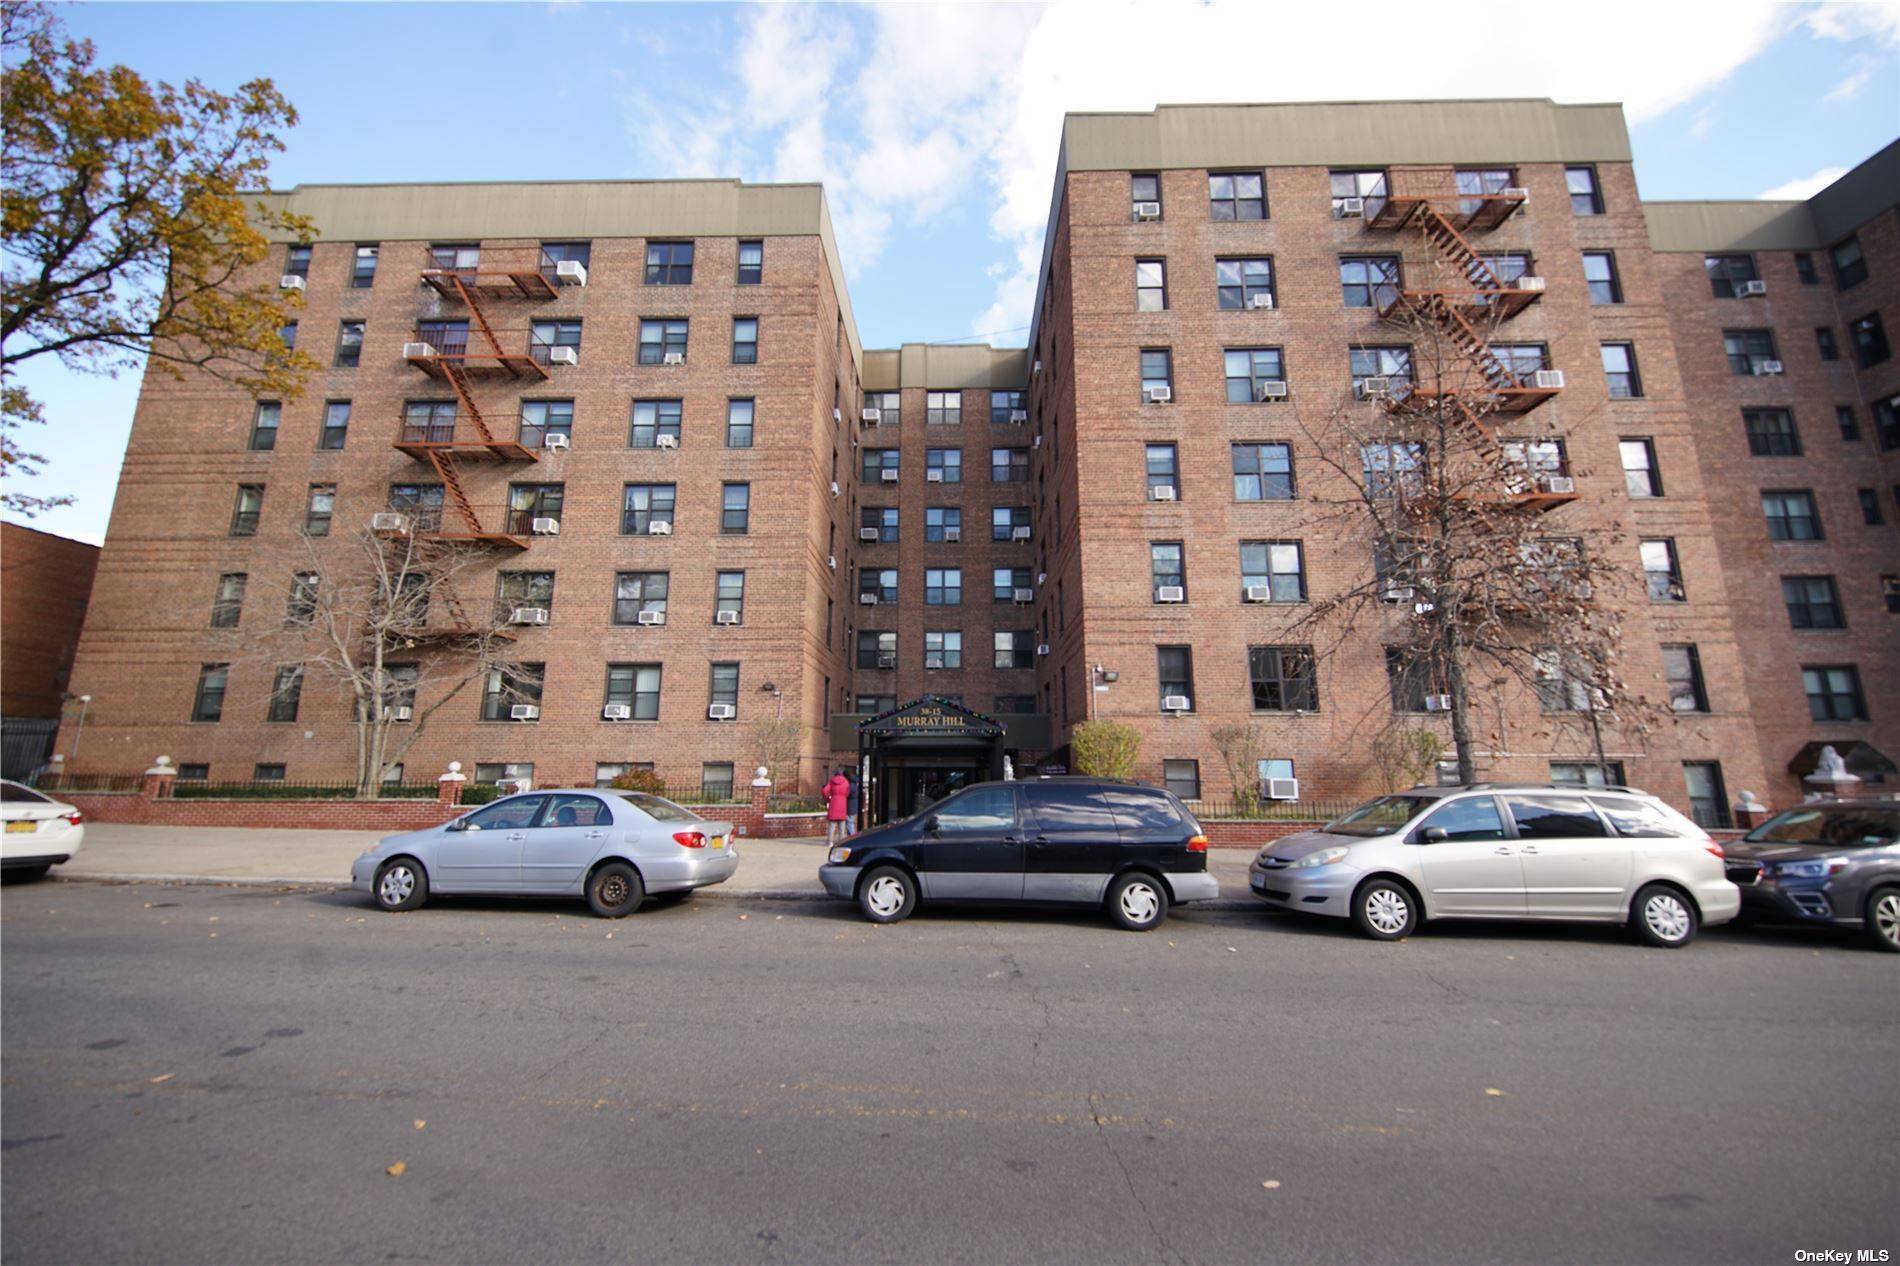 Great Location, large 3 bedrooms Co op at Murry Hill Cooperative situated in a flourishing neighborhood in Flushing between Northern Blvd and Roosevelt Ave.